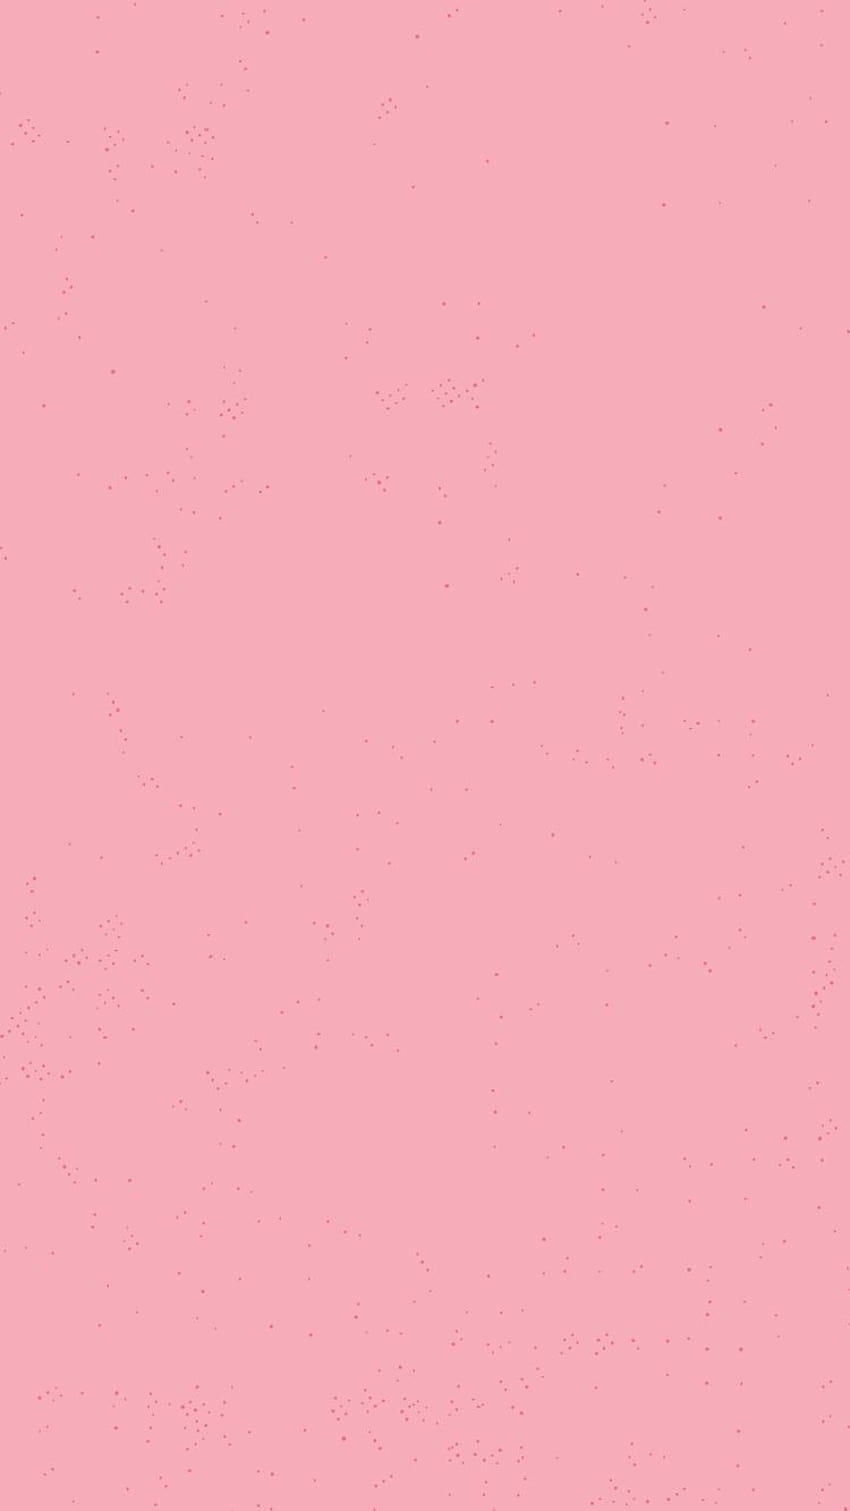 I liked this pink particularly due to its ability to stand out and, blue and pink blend HD phone wallpaper